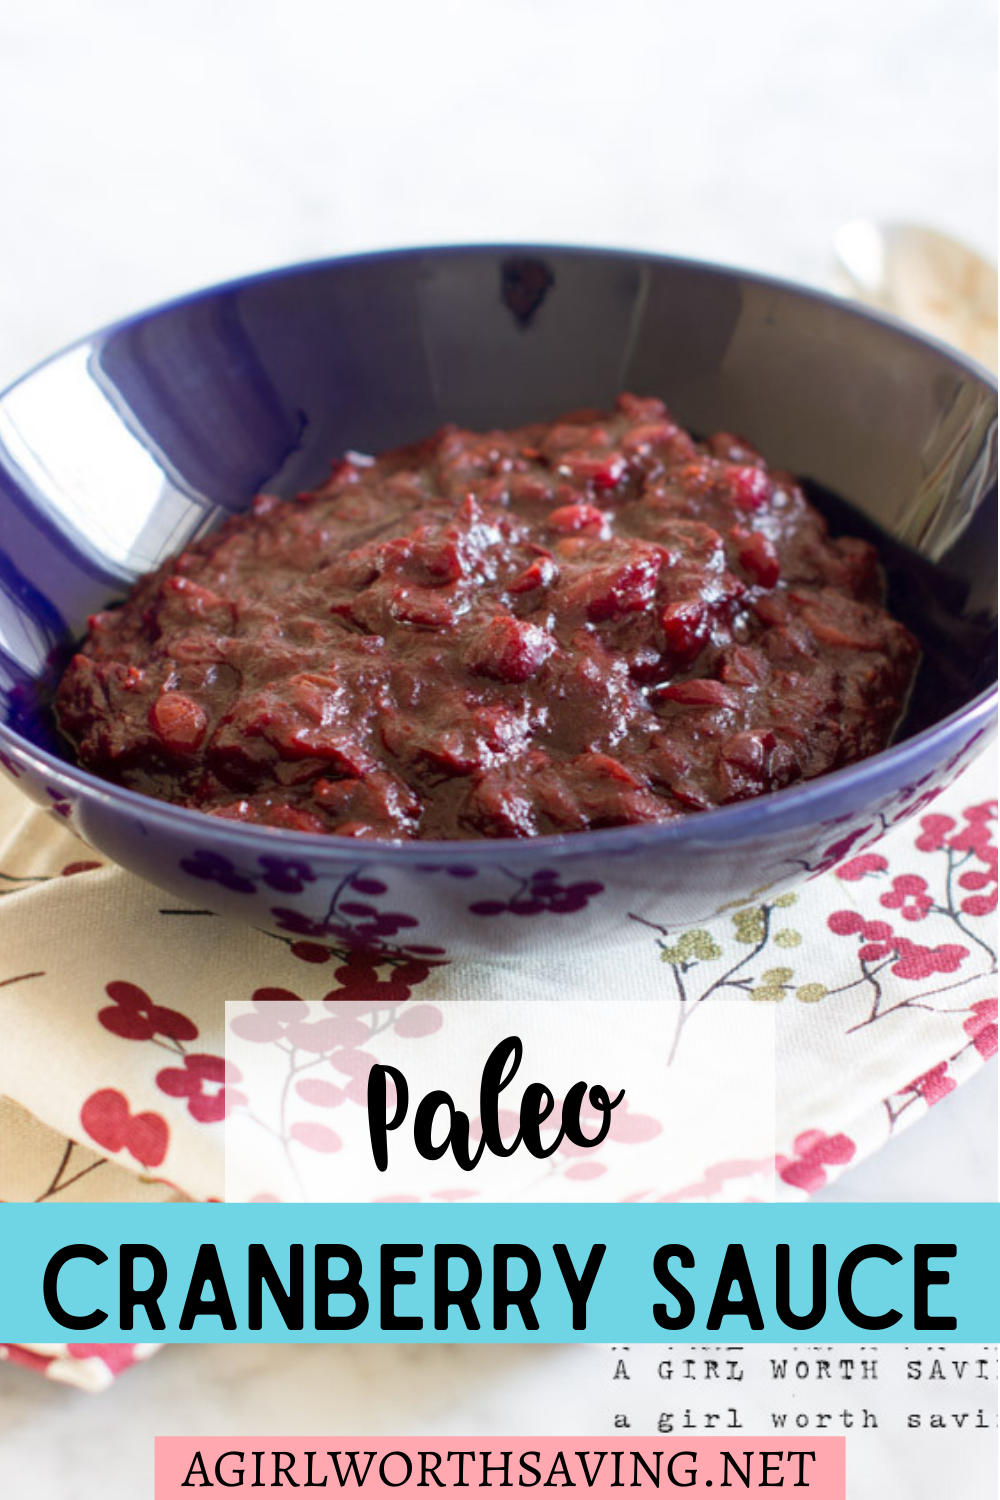 This Paleo Cranberry sauce is made with only 4 ingredients and you can easily add orange rind or juice for a simple twist. Homemade cranberry sauce is so simple to make and kicks the pants out of store bought.